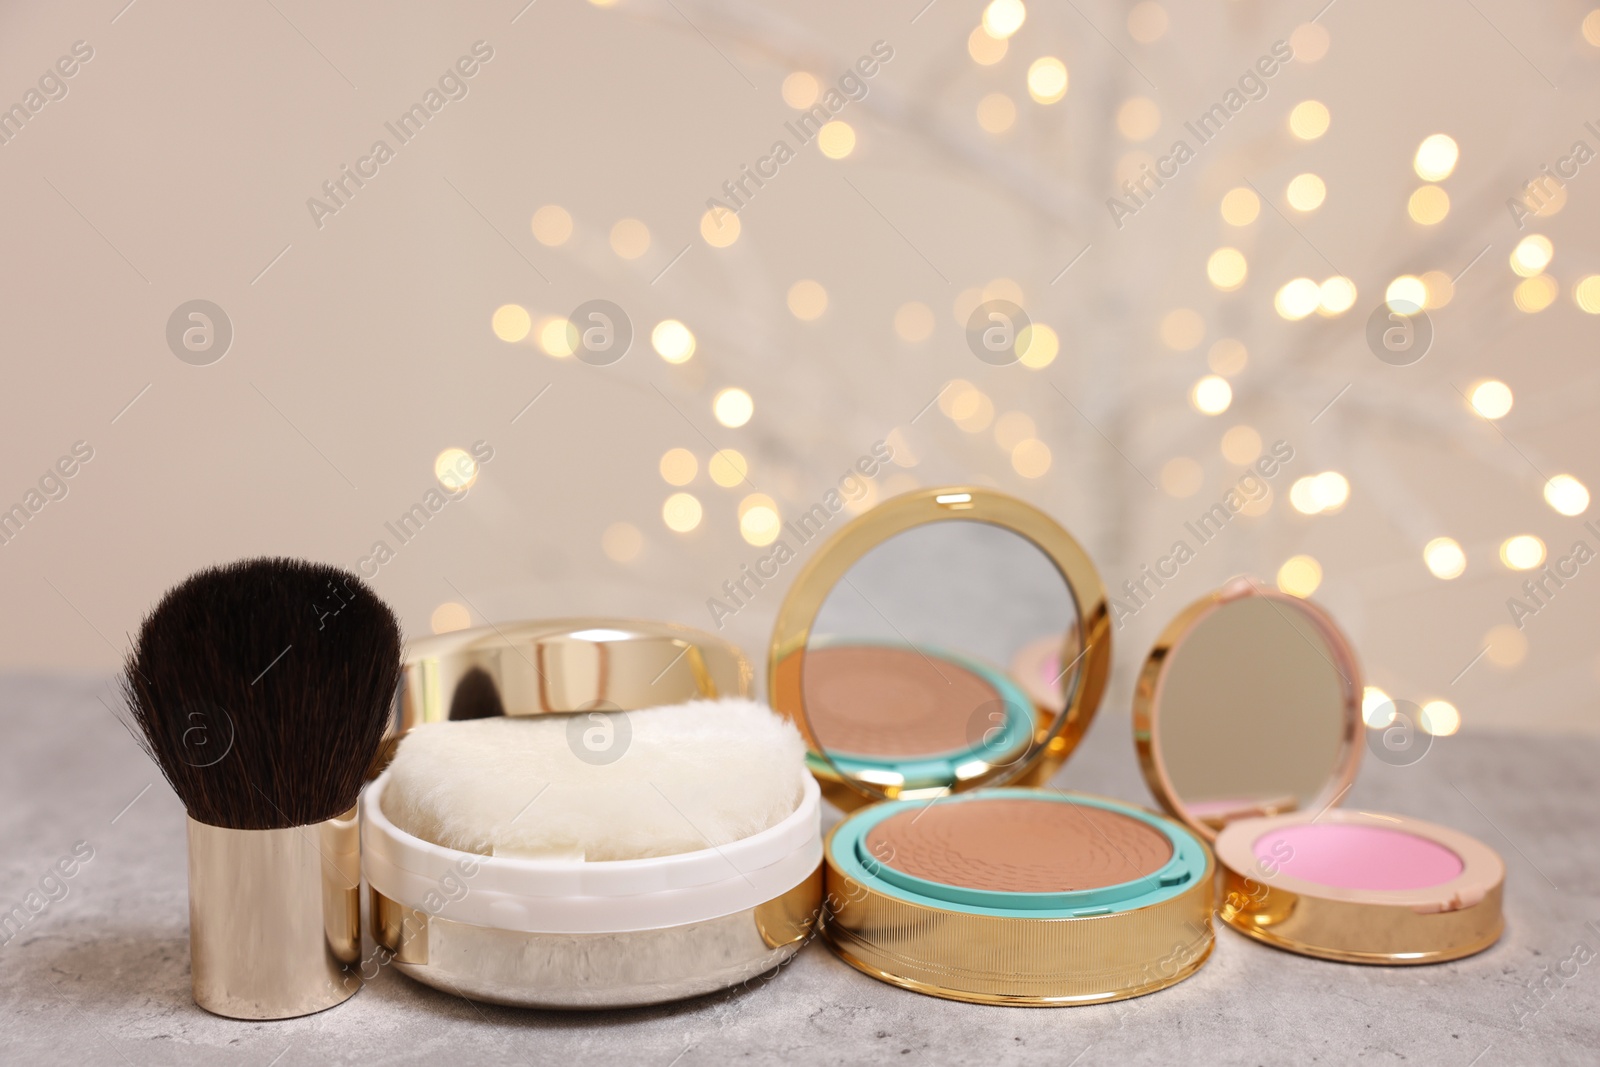 Photo of Bronzer, powder, blusher and brush on grey textured table against blurred lights, closeup